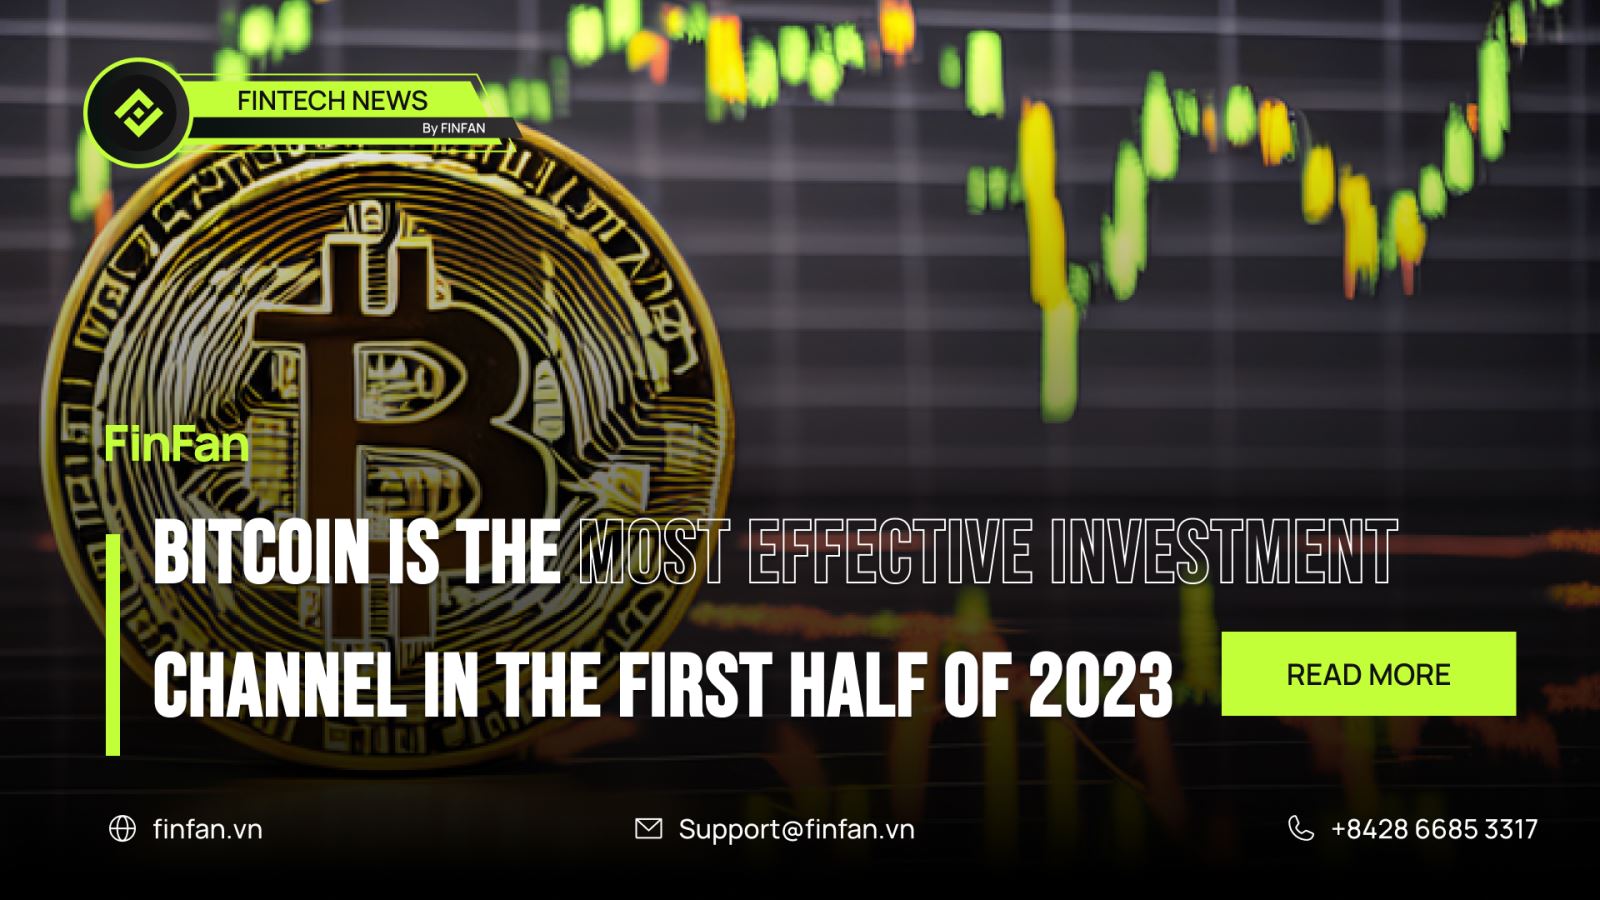 Bitcoin is the most effective investment channel in the first half of 2023. Is that good or bad?